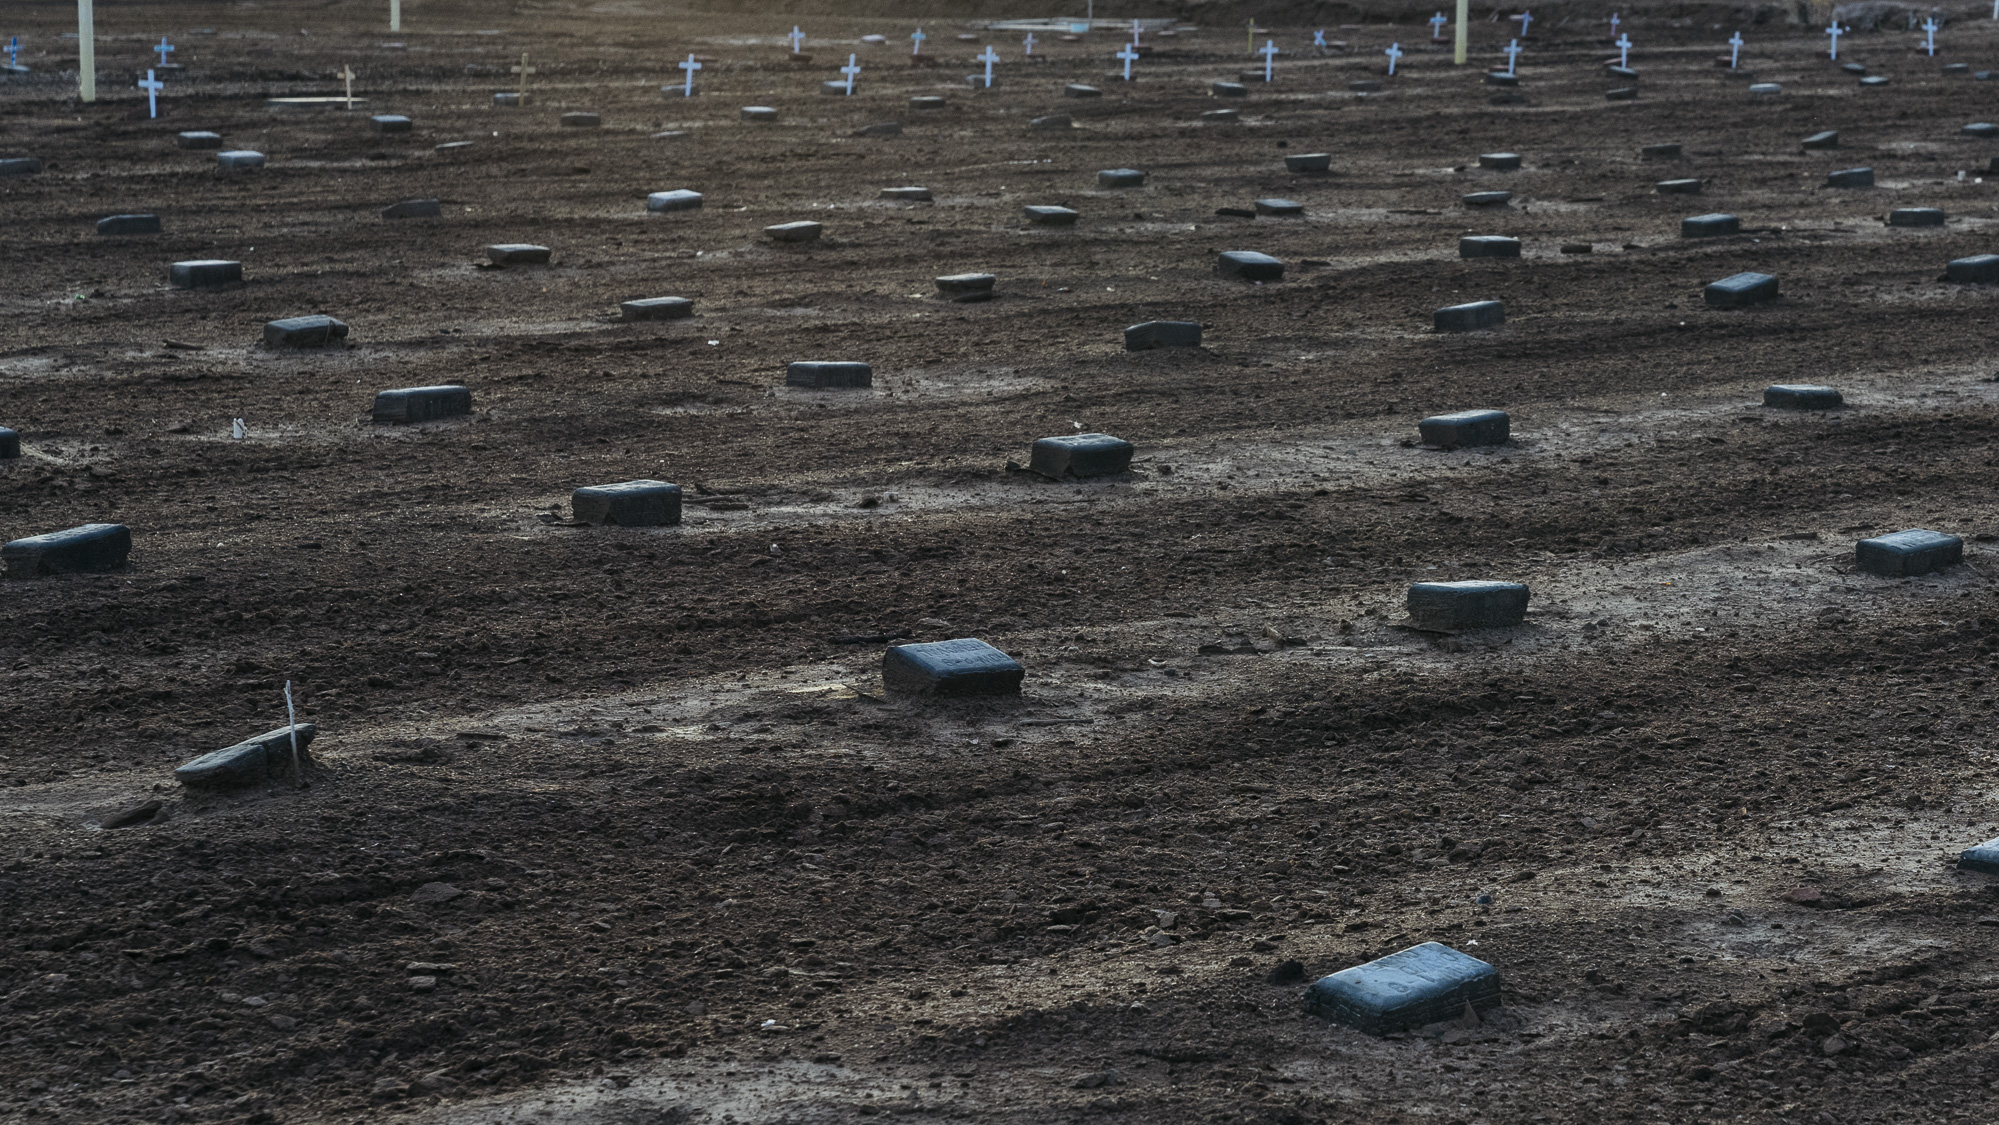  IMAGE CAPTION:  There are over 500 simply marked graves for deceased migrants in a dirt lot behind the Terrace Park Cemetery in Holtville, California. Most read Jane or John Doe.&nbsp;&nbsp; 